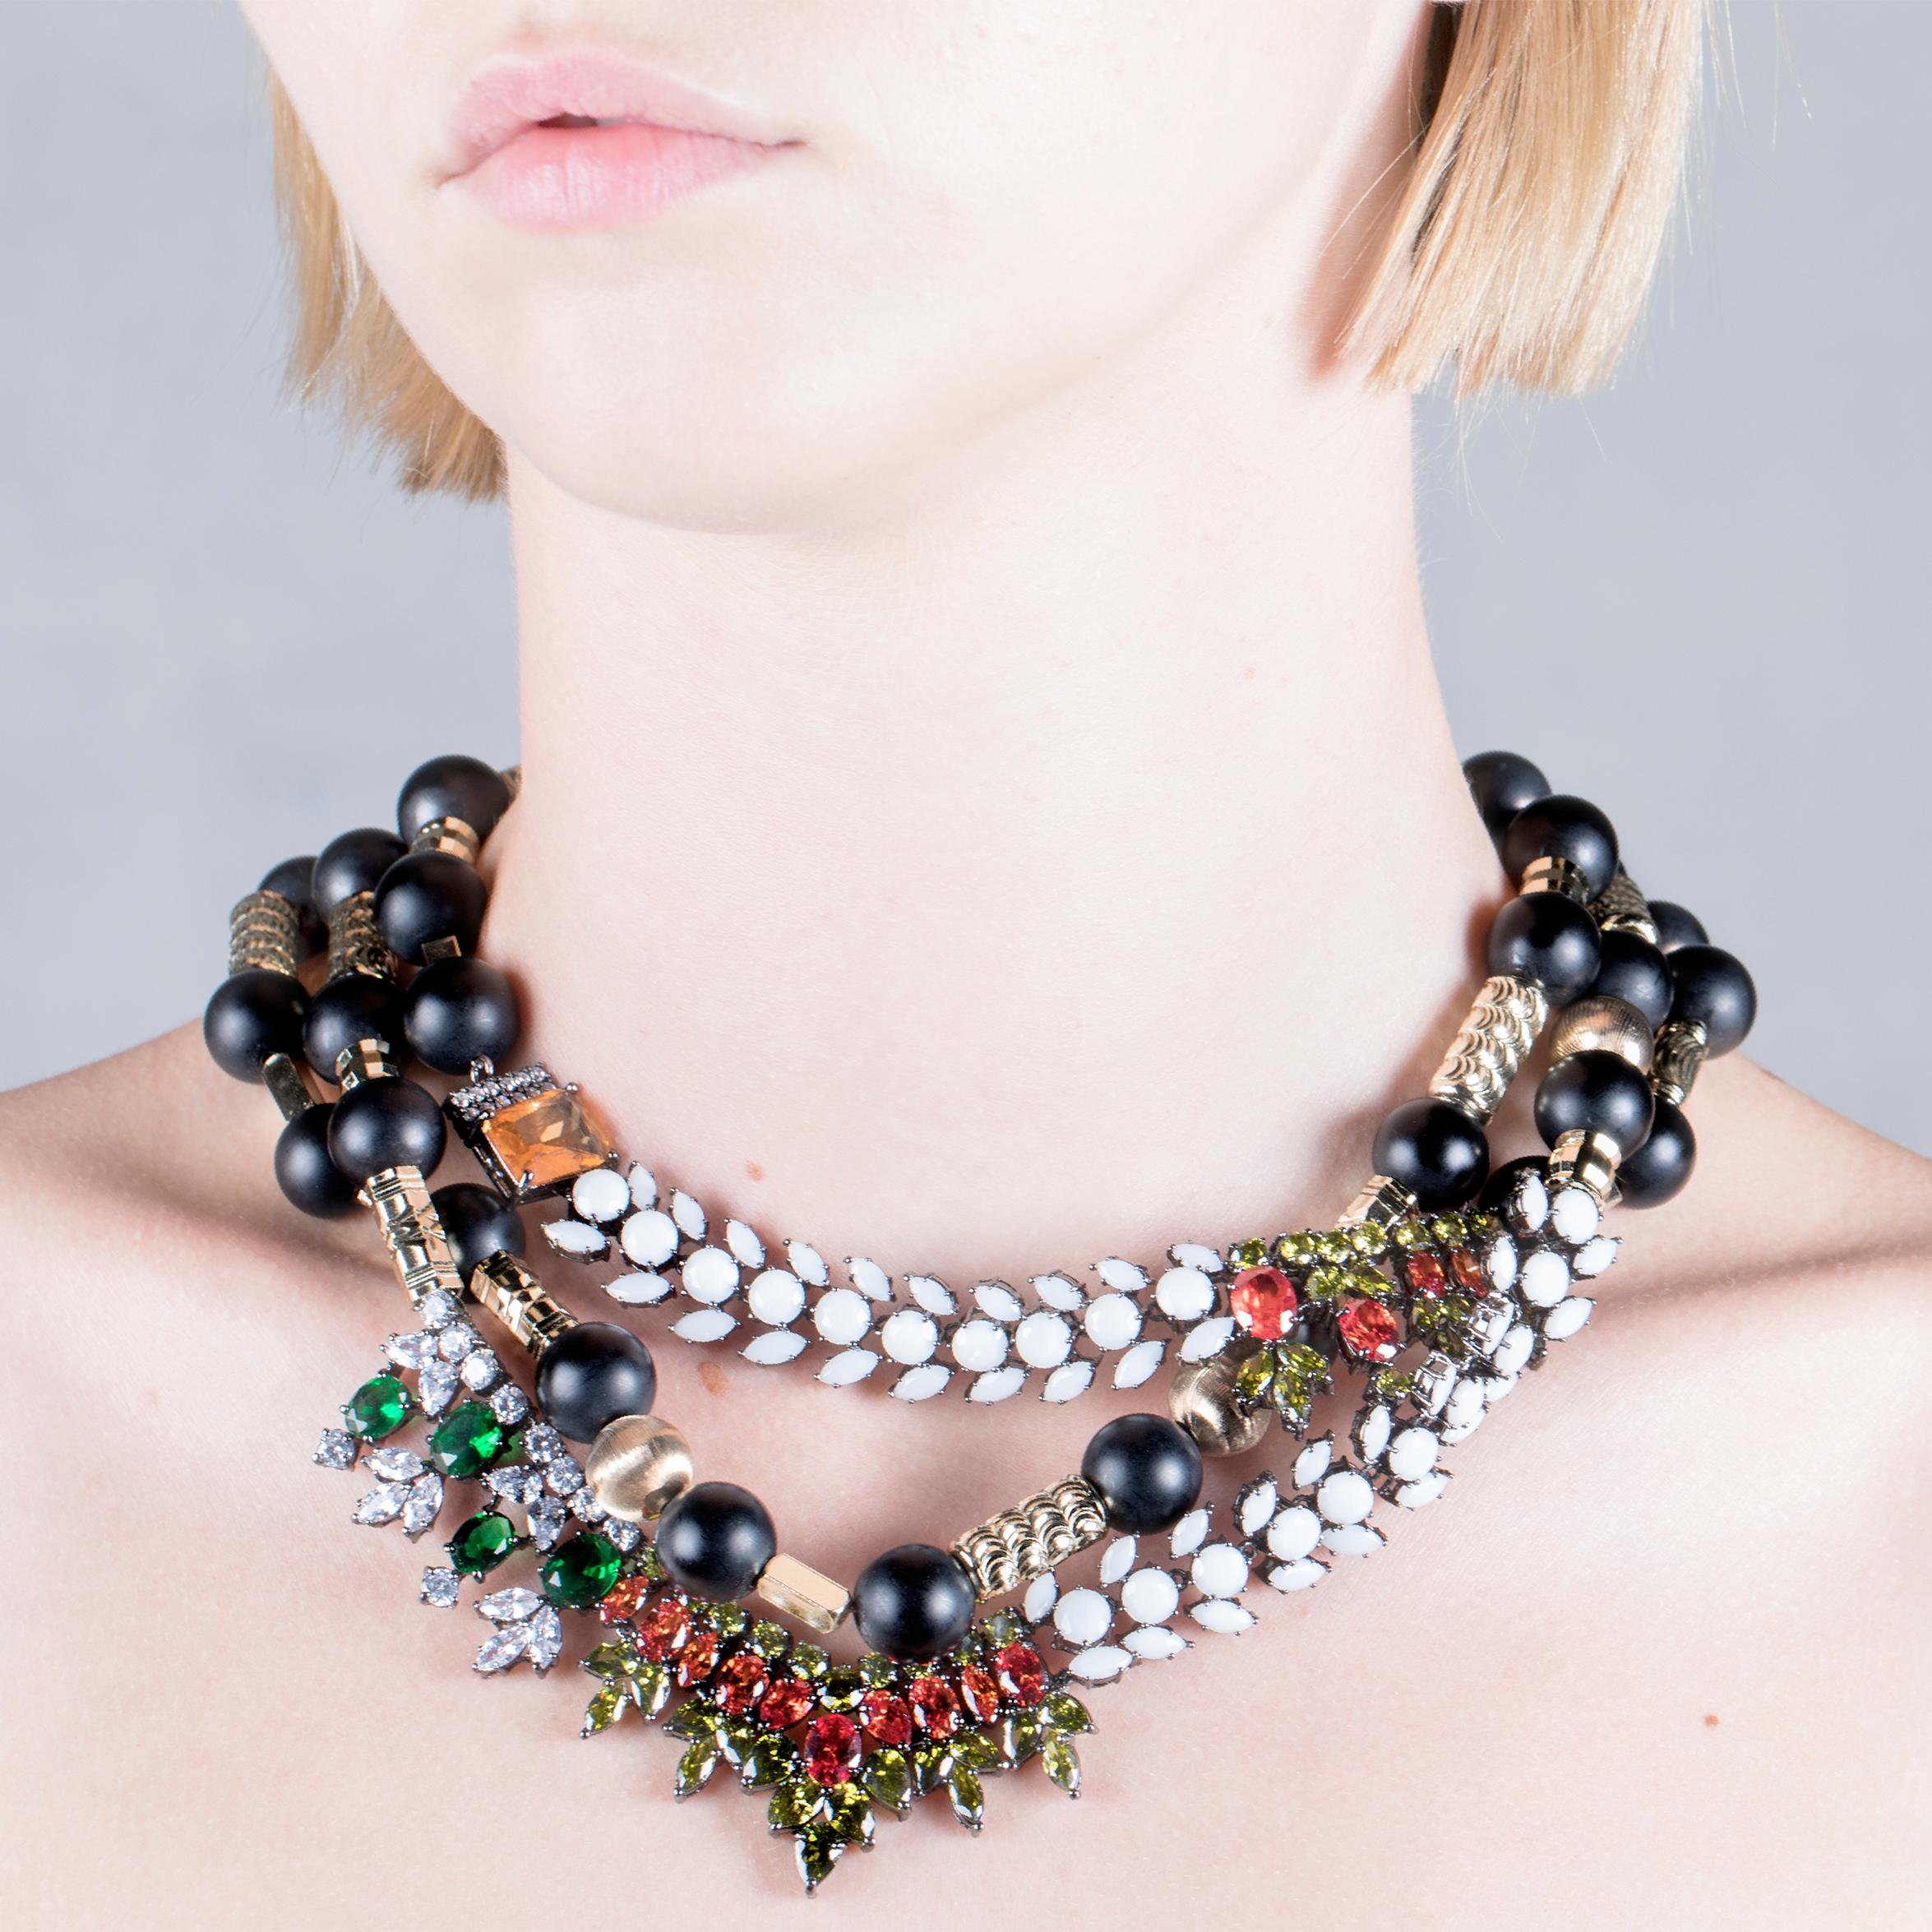 Inject a dose of color with this IOSSELLIANI CLUB AFRICANA statement necklace. Following the vocation of the brand, this piece translates colors and shapes into eclectic jewels, featuring a cascade of white glass stones mixed with a green and orange